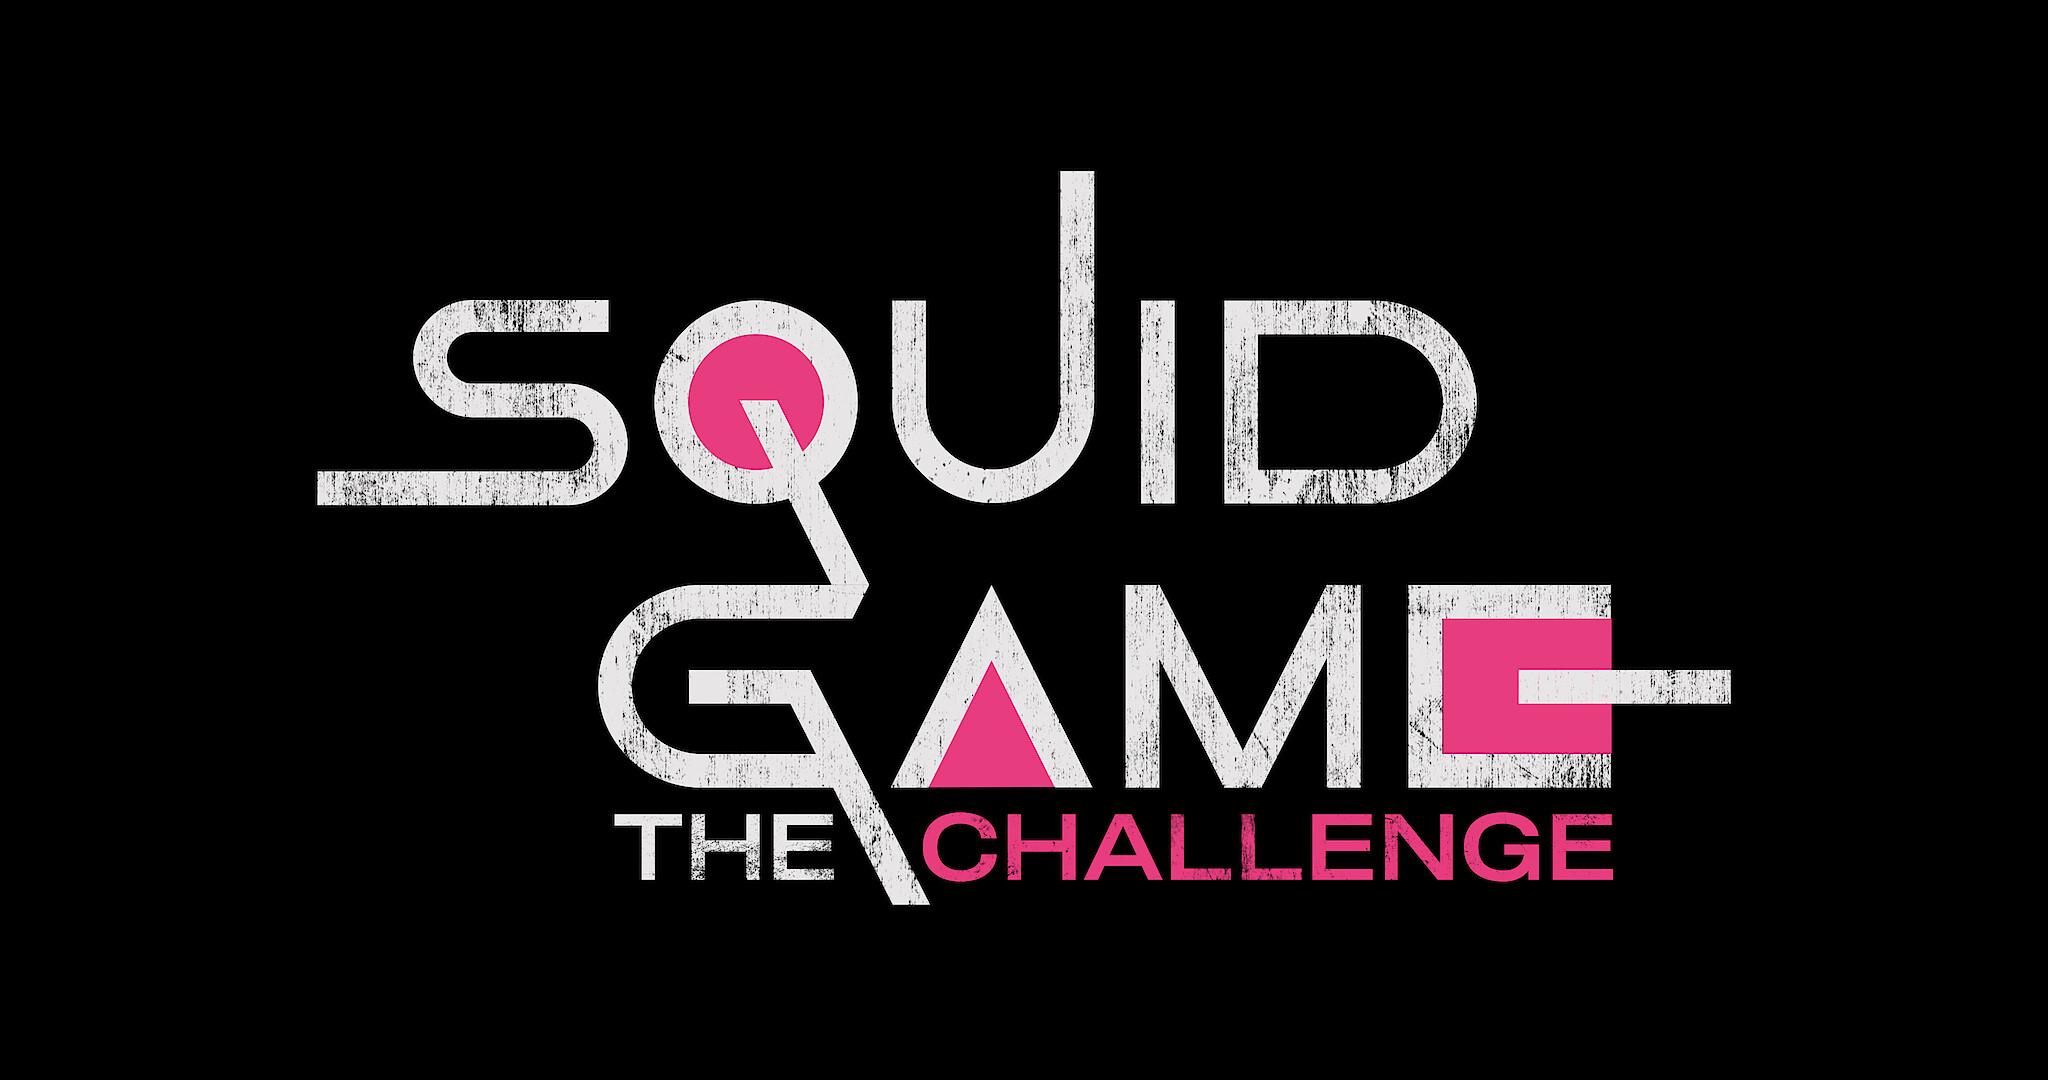 When Is the Squid Game: The Challenge Finale Airing?